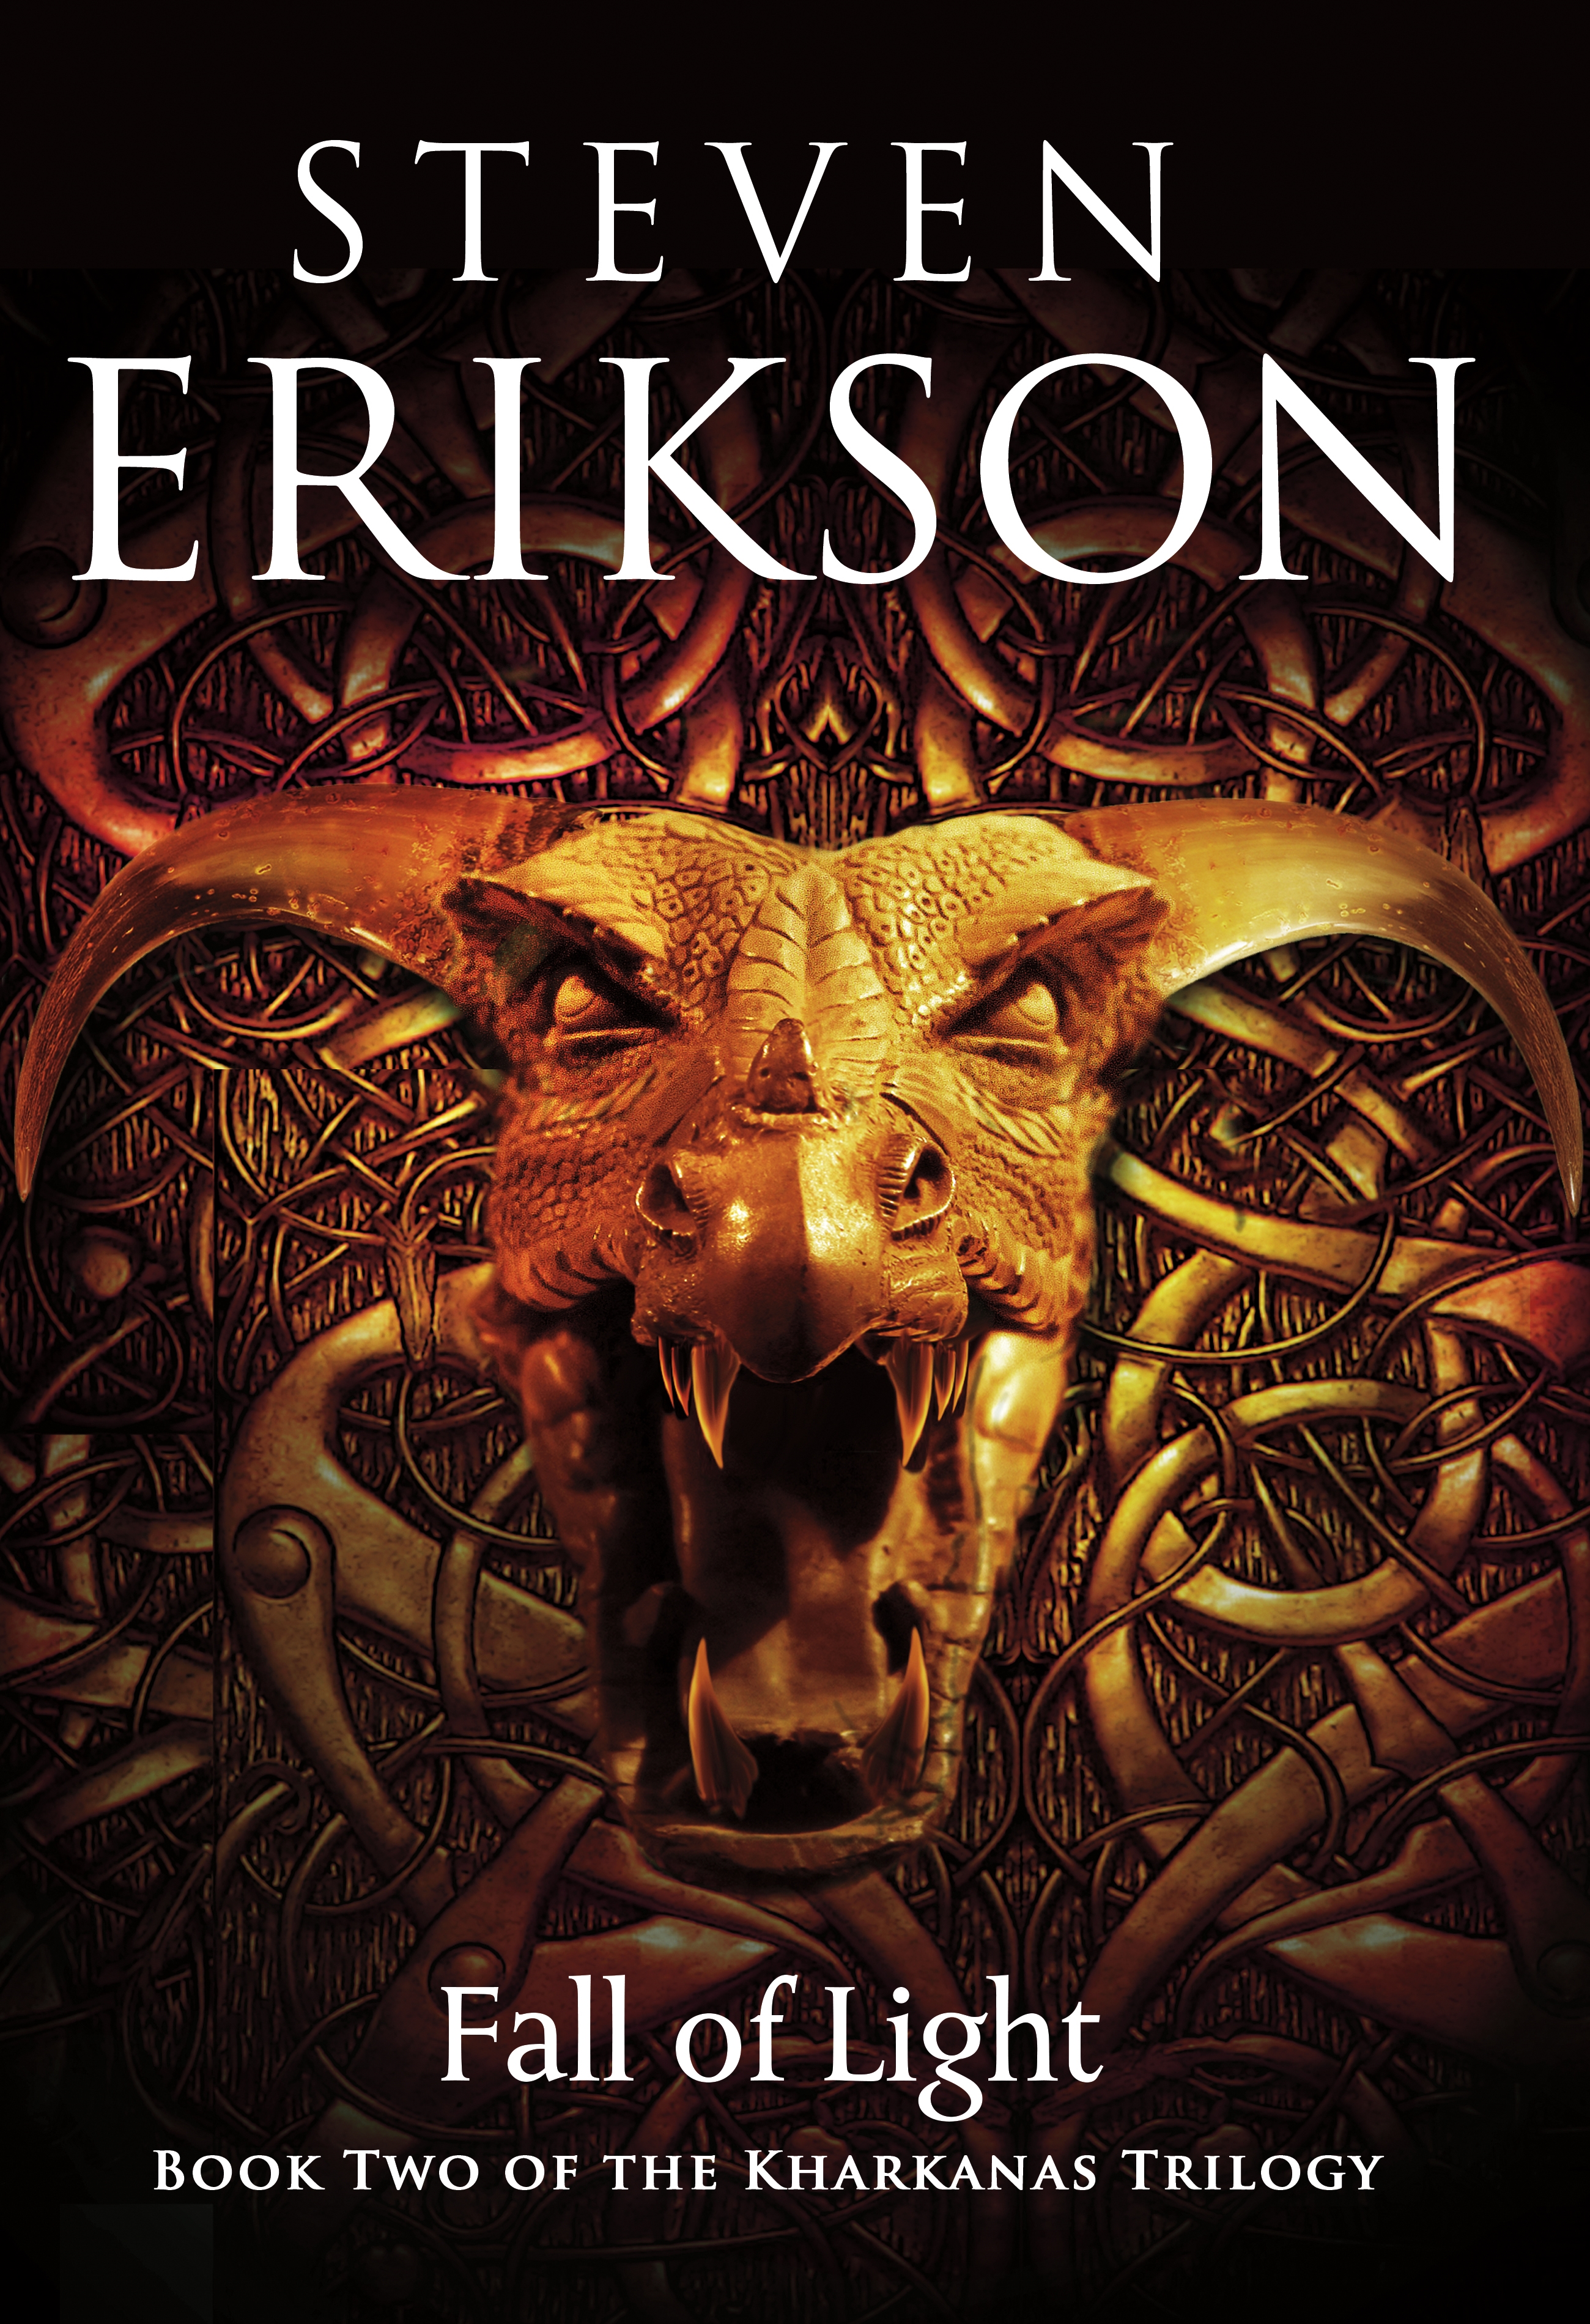 Fall of Light : Book Two of the Kharkanas Trilogy by Steven Erikson